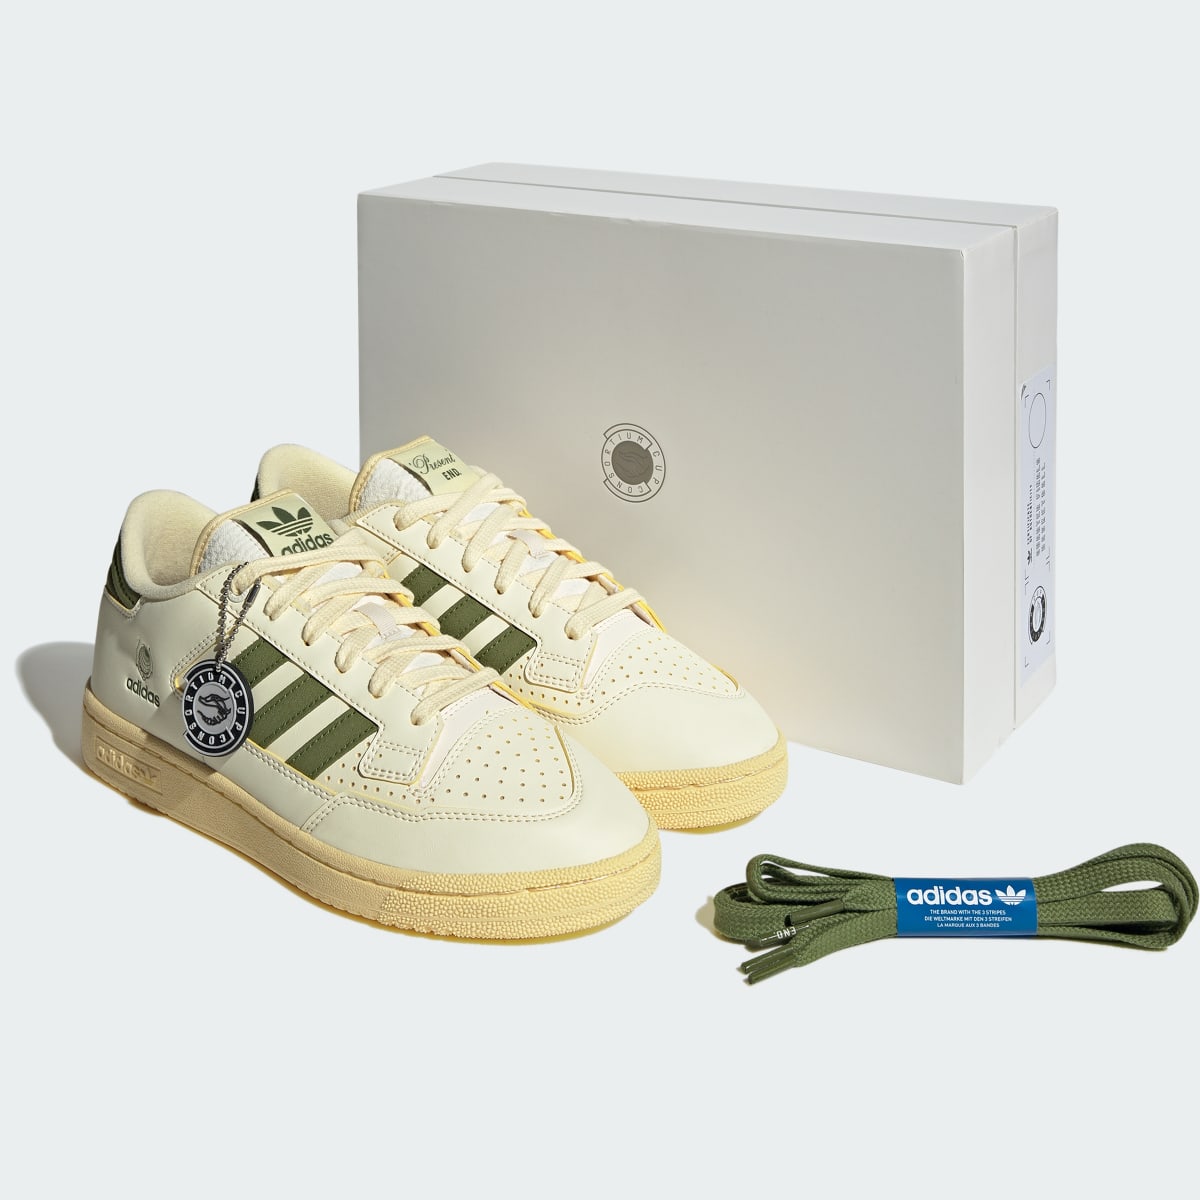 Adidas Centennial Low END. Trainers. 8